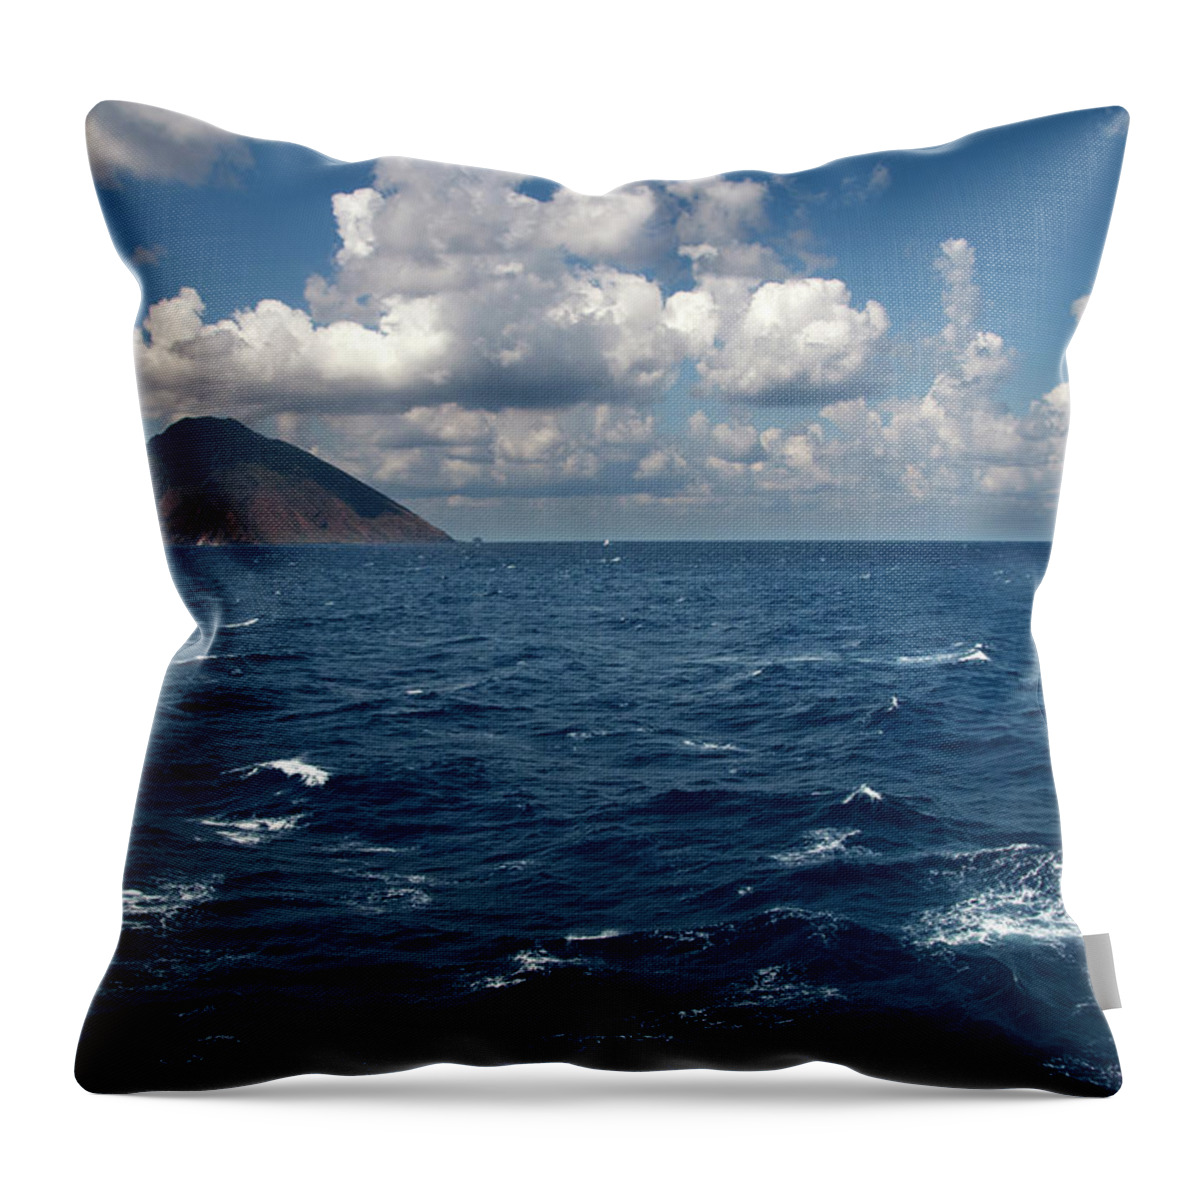 Tranquility Throw Pillow featuring the photograph Stromboli Volcano by Mitch Diamond